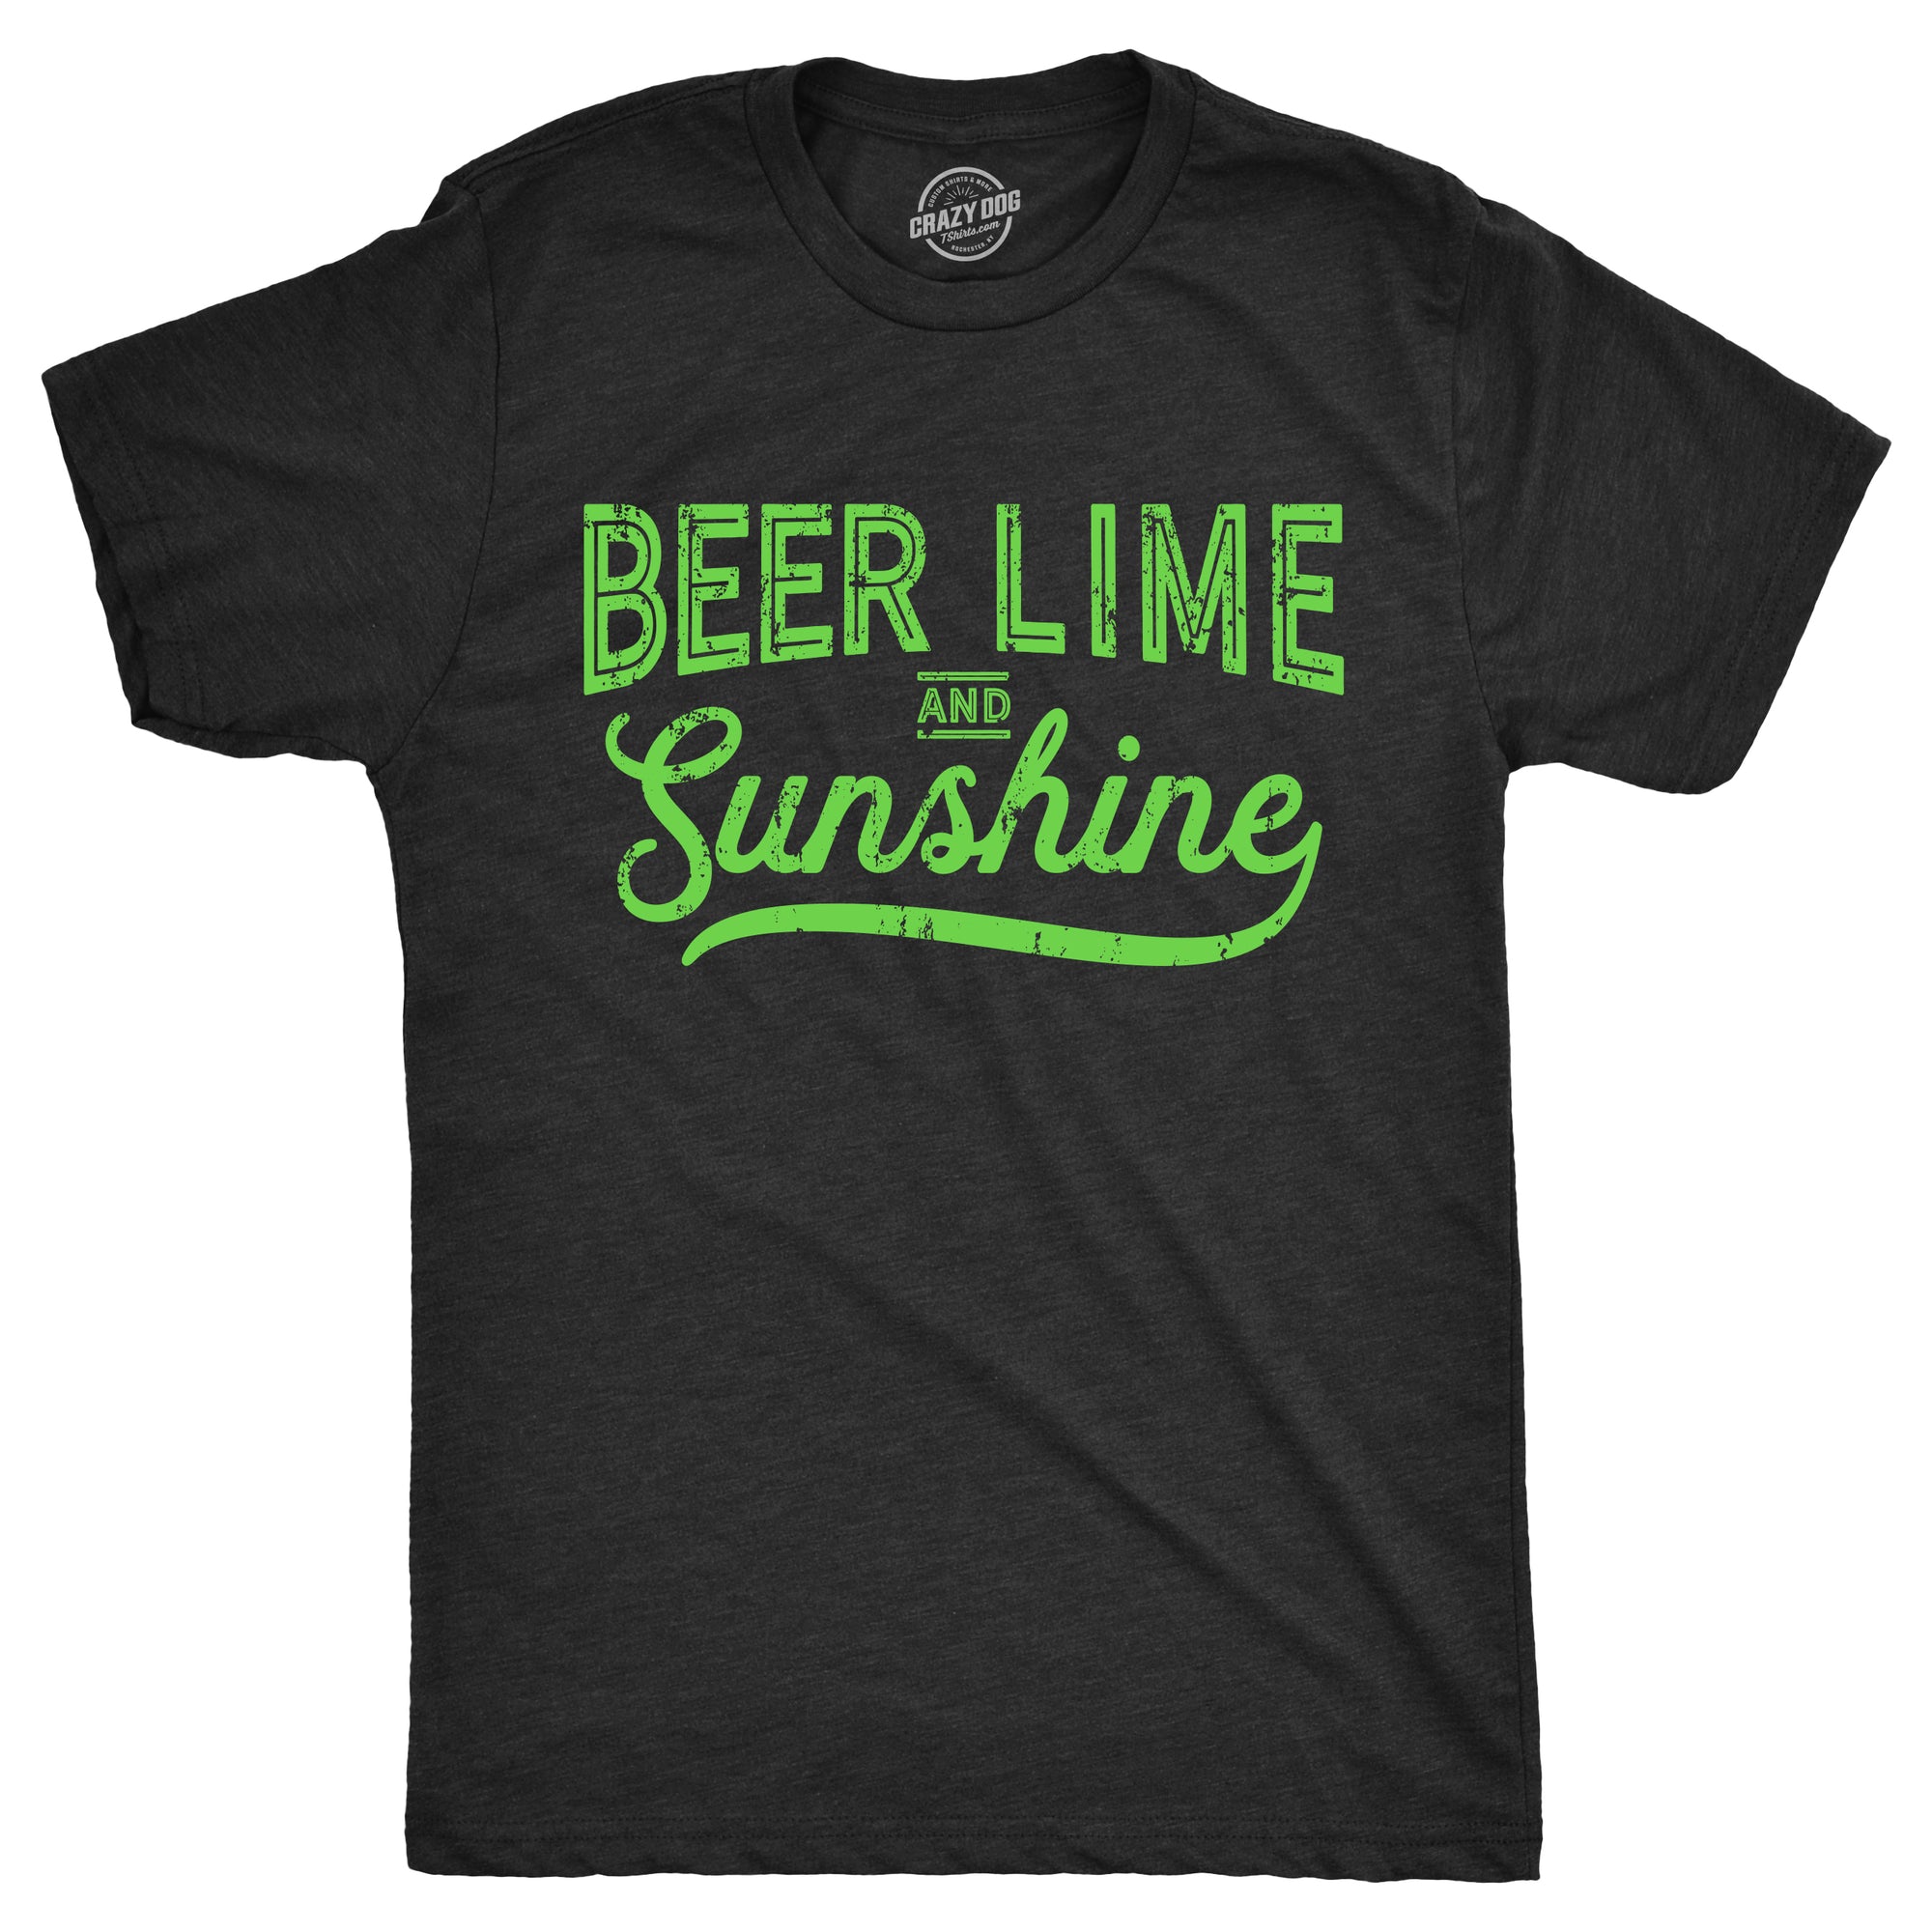 Funny Heather Black - Lime-Sunshine Beer Lime and Sunshine Mens T Shirt Nerdy Vacation Beer Tee